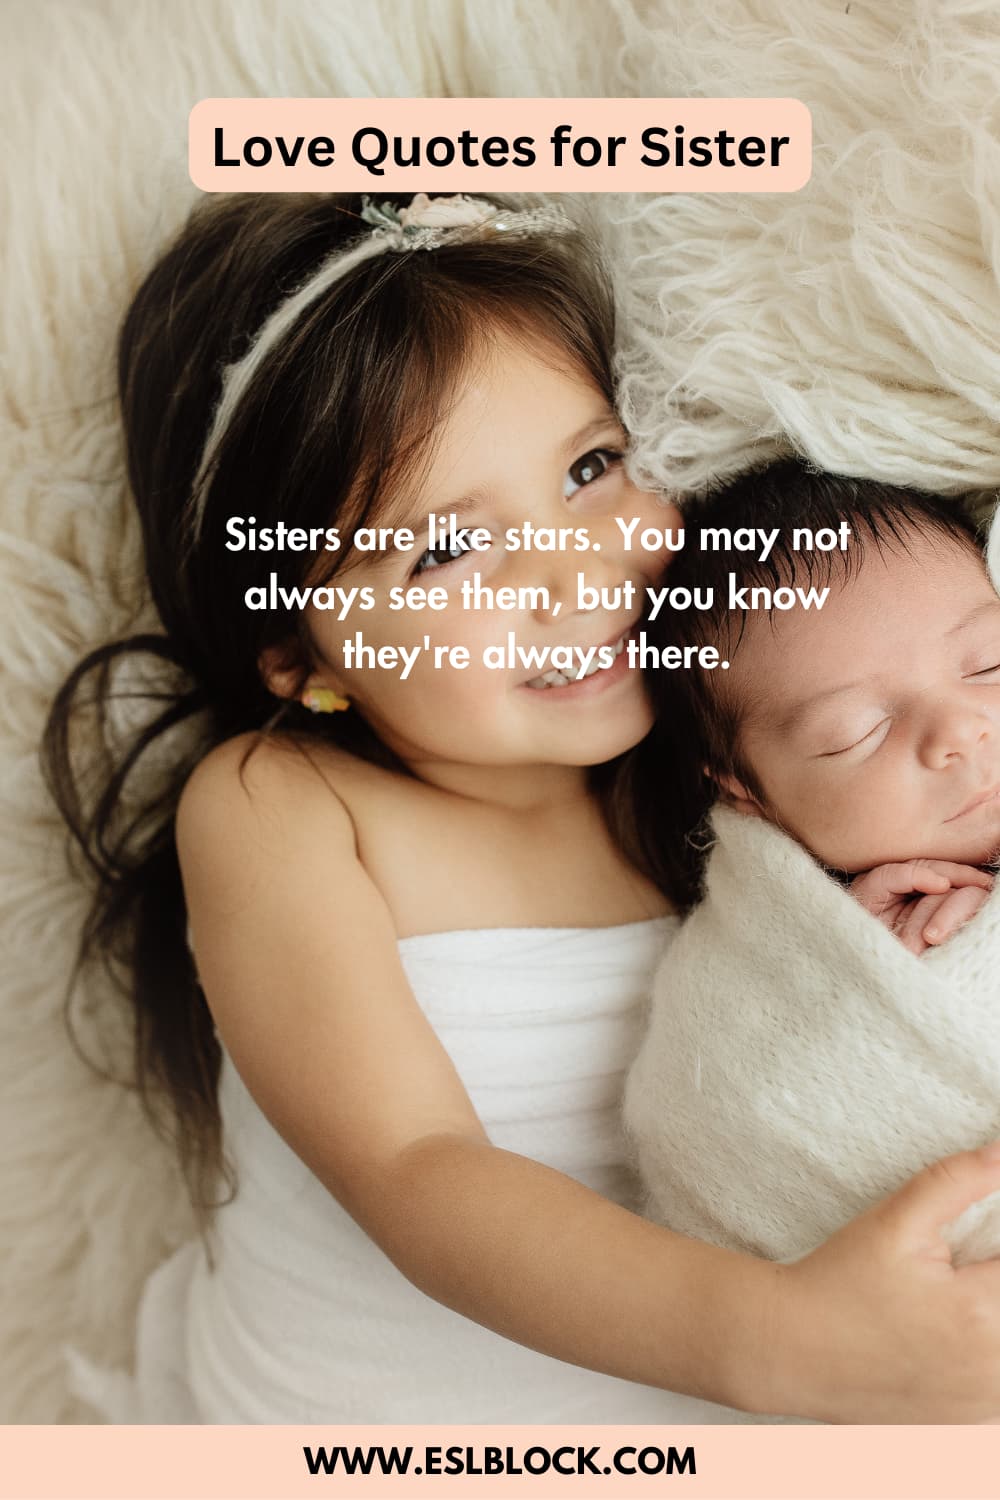 50 Love Quotes for Sister